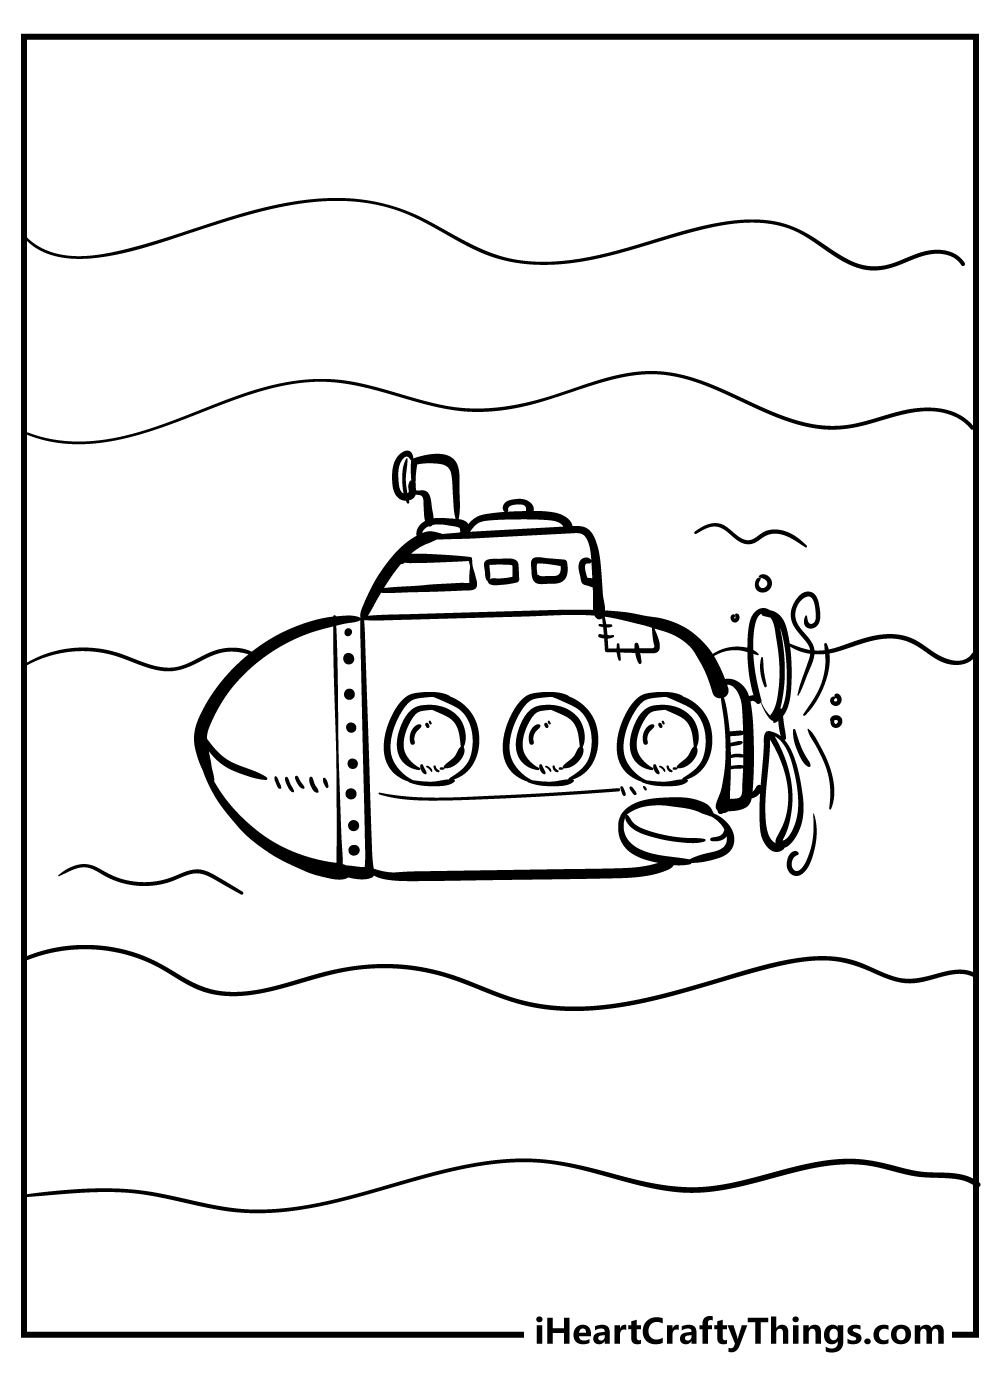 Submarine Coloring Pages for adults free printable